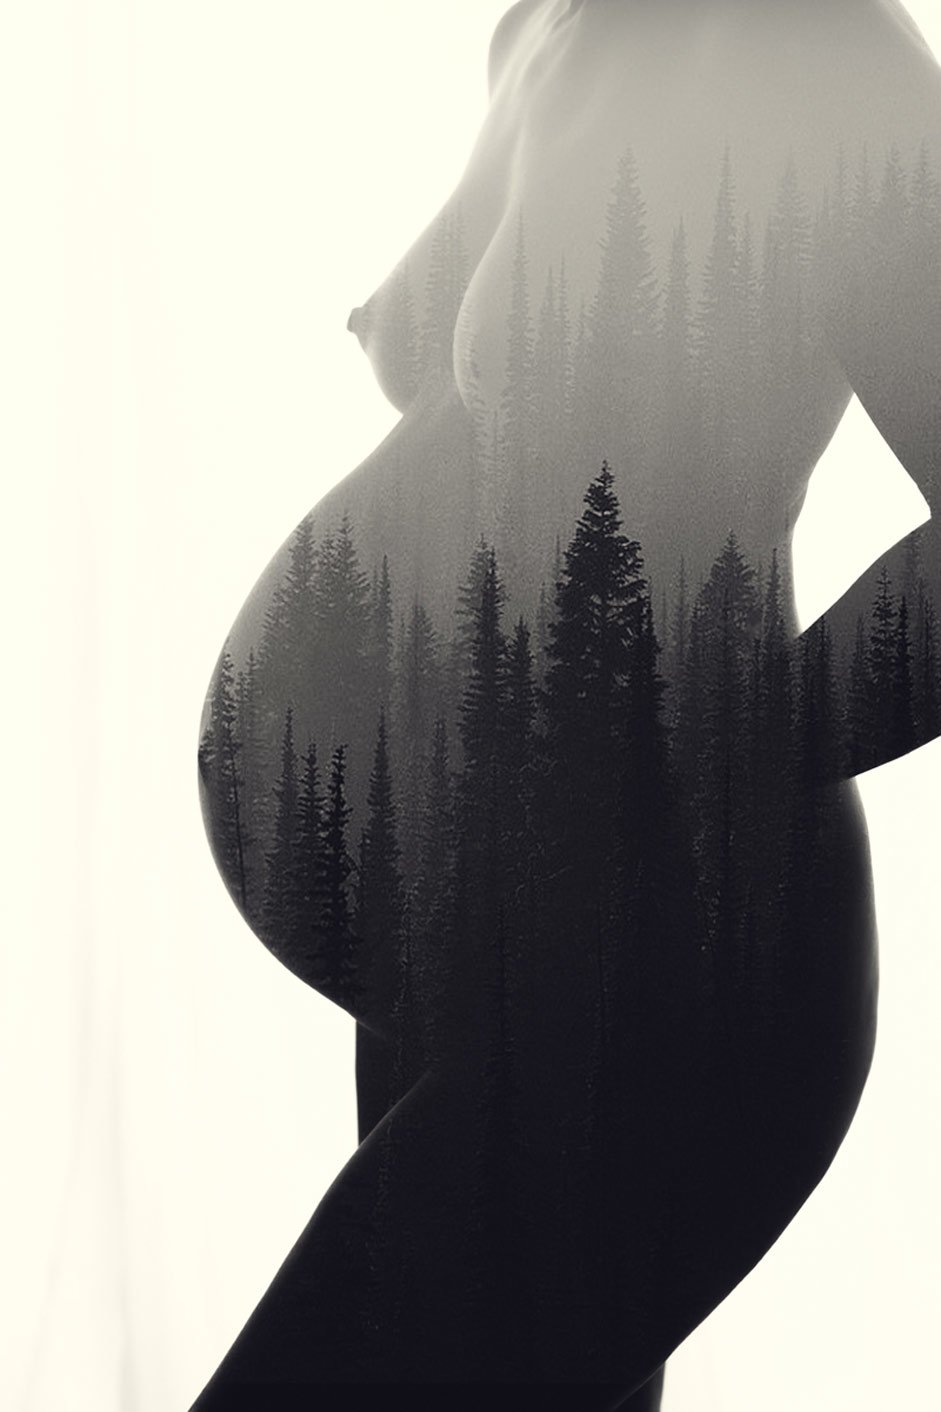 Fine art and Nude artistic pregnancy photos 4